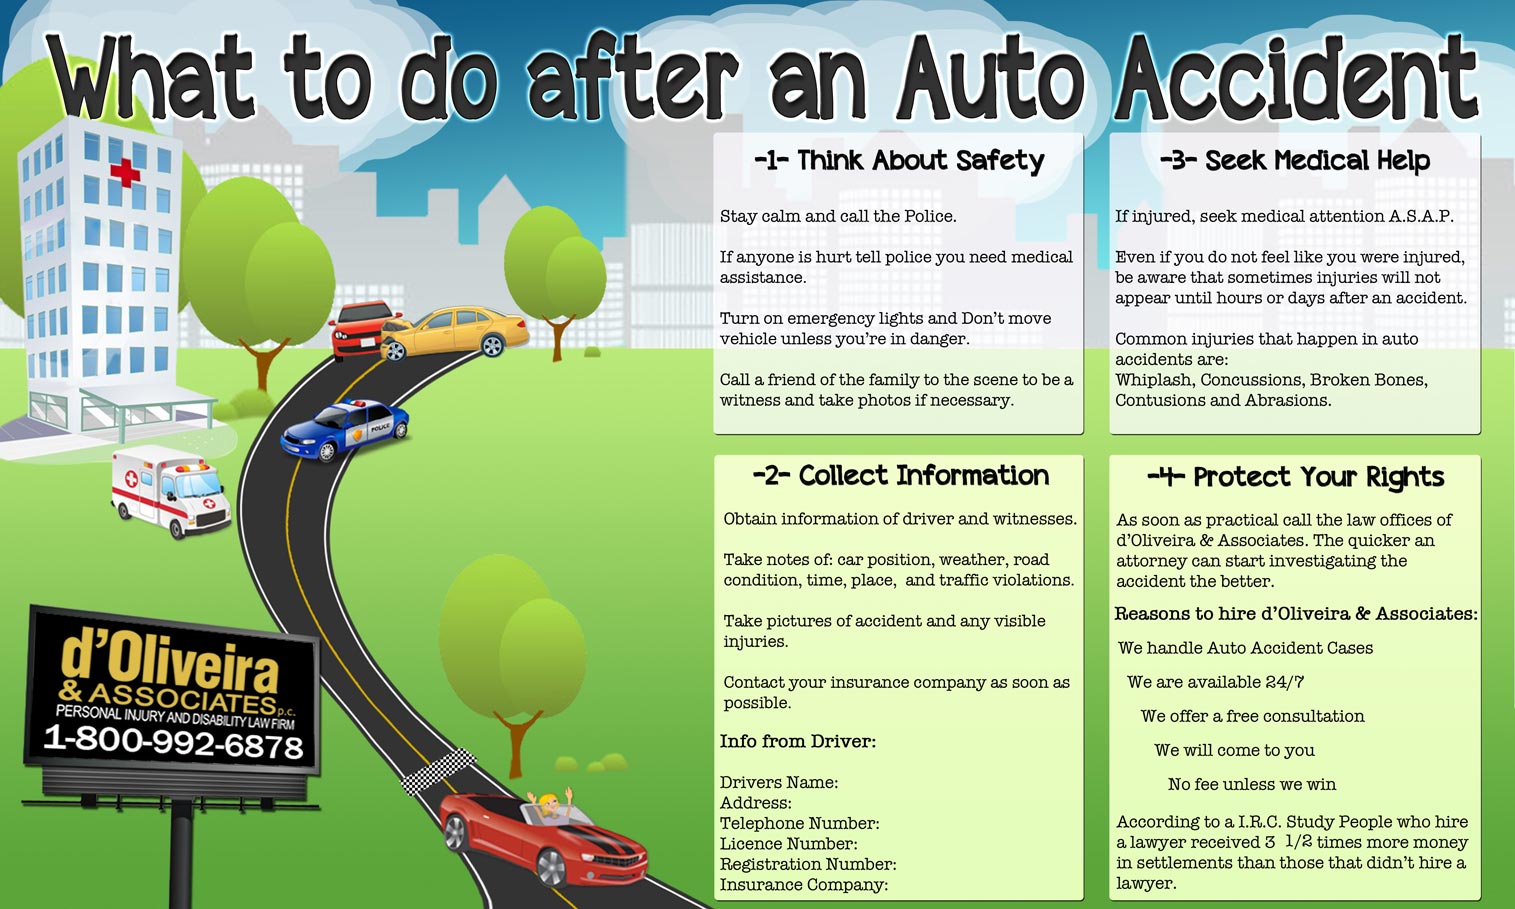 What to do after an Auto Accident Infographic